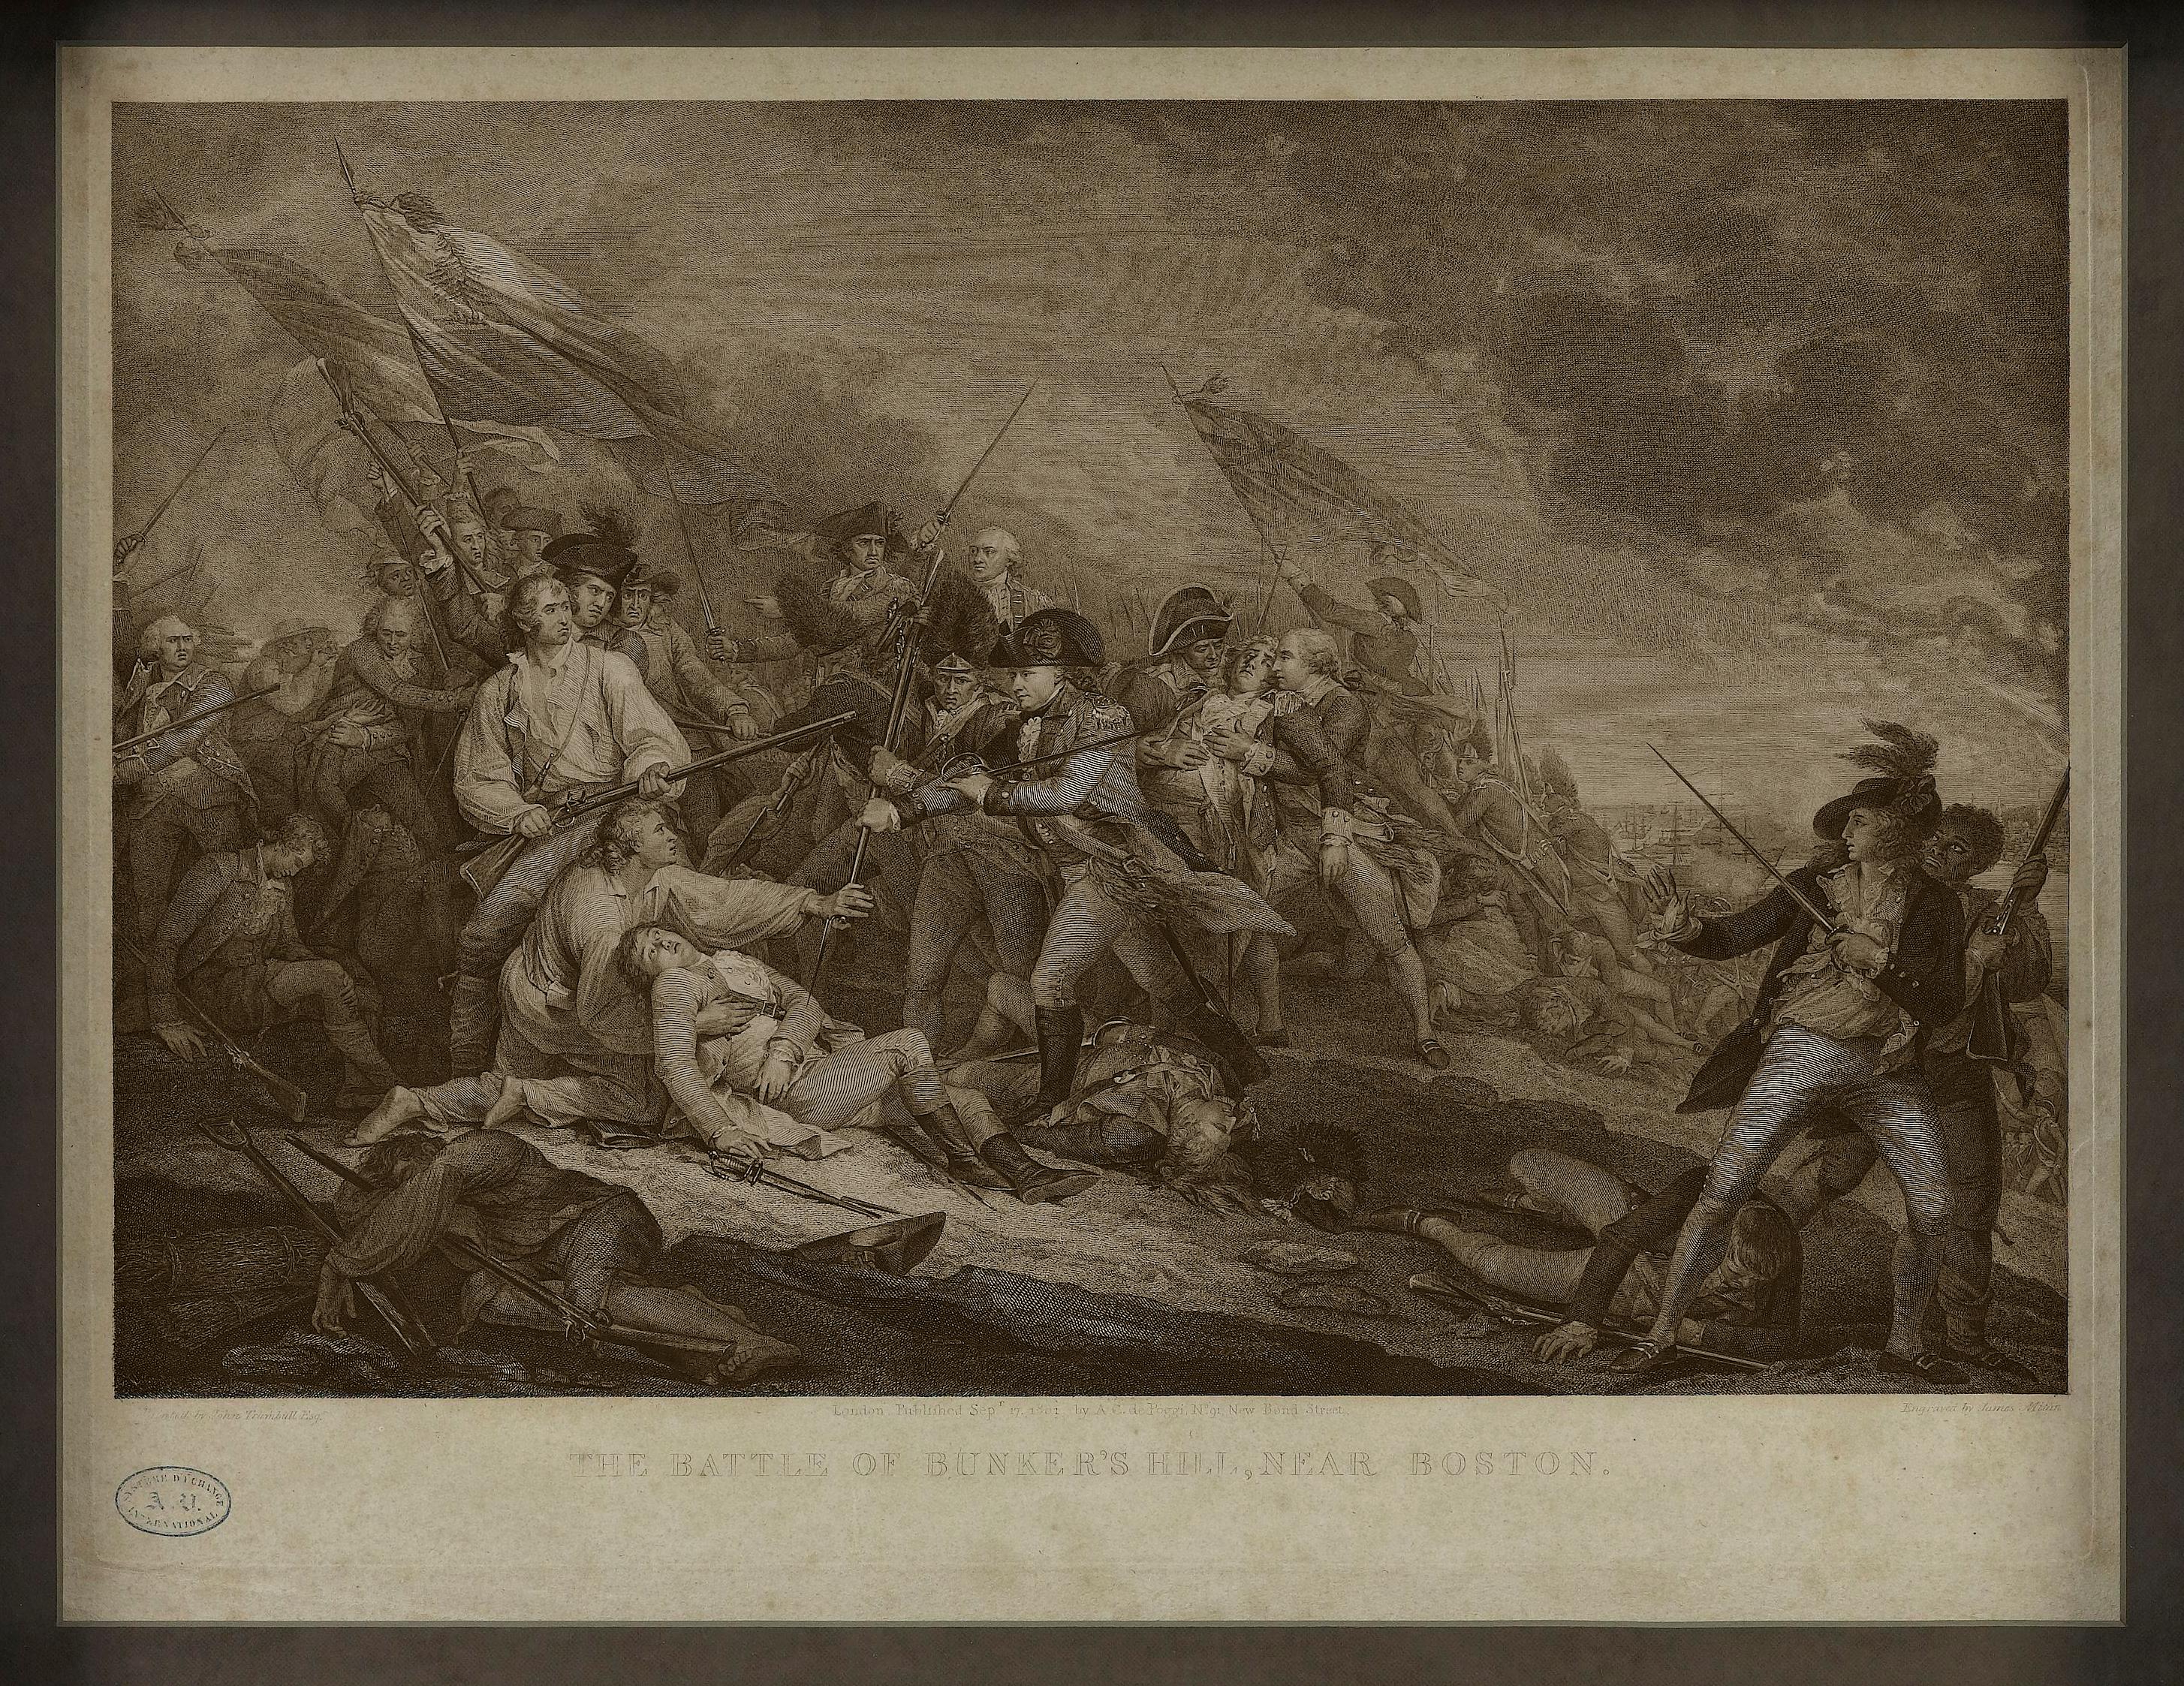 This dramatic Revolutionary War engraving of the Battle of Bunker Hill is after the famous 1785 oil-on-canvas by John Trumbull. Capturing the intensity of the battle, the engraving centers on Major John Small restraining a “lobster-back” from